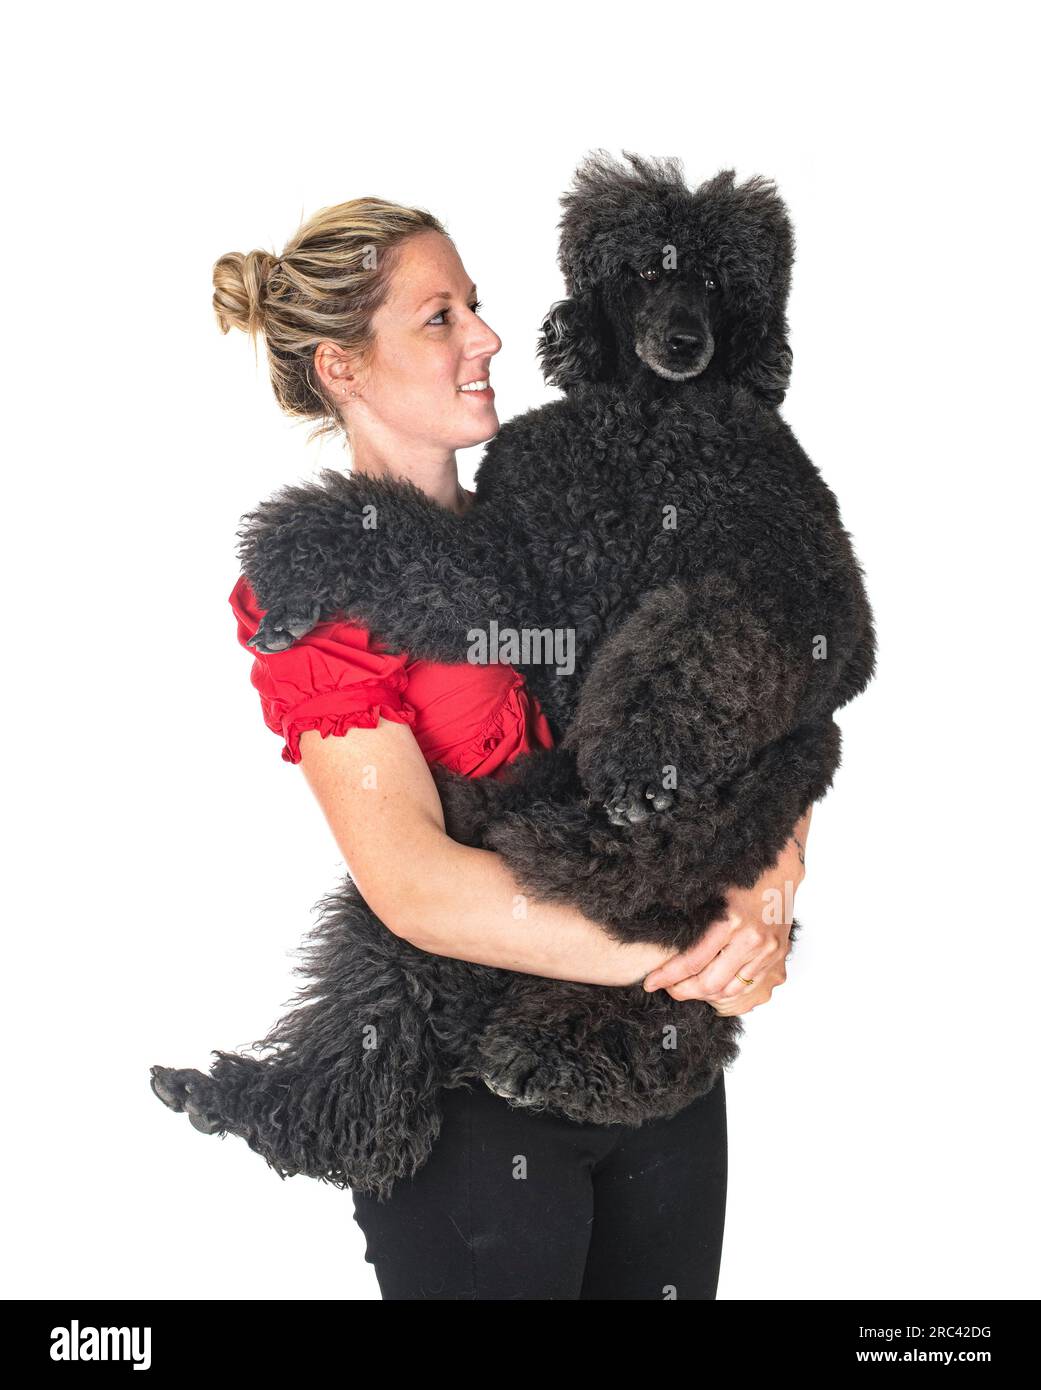 standard black poodle and woman in front of white background Stock Photo